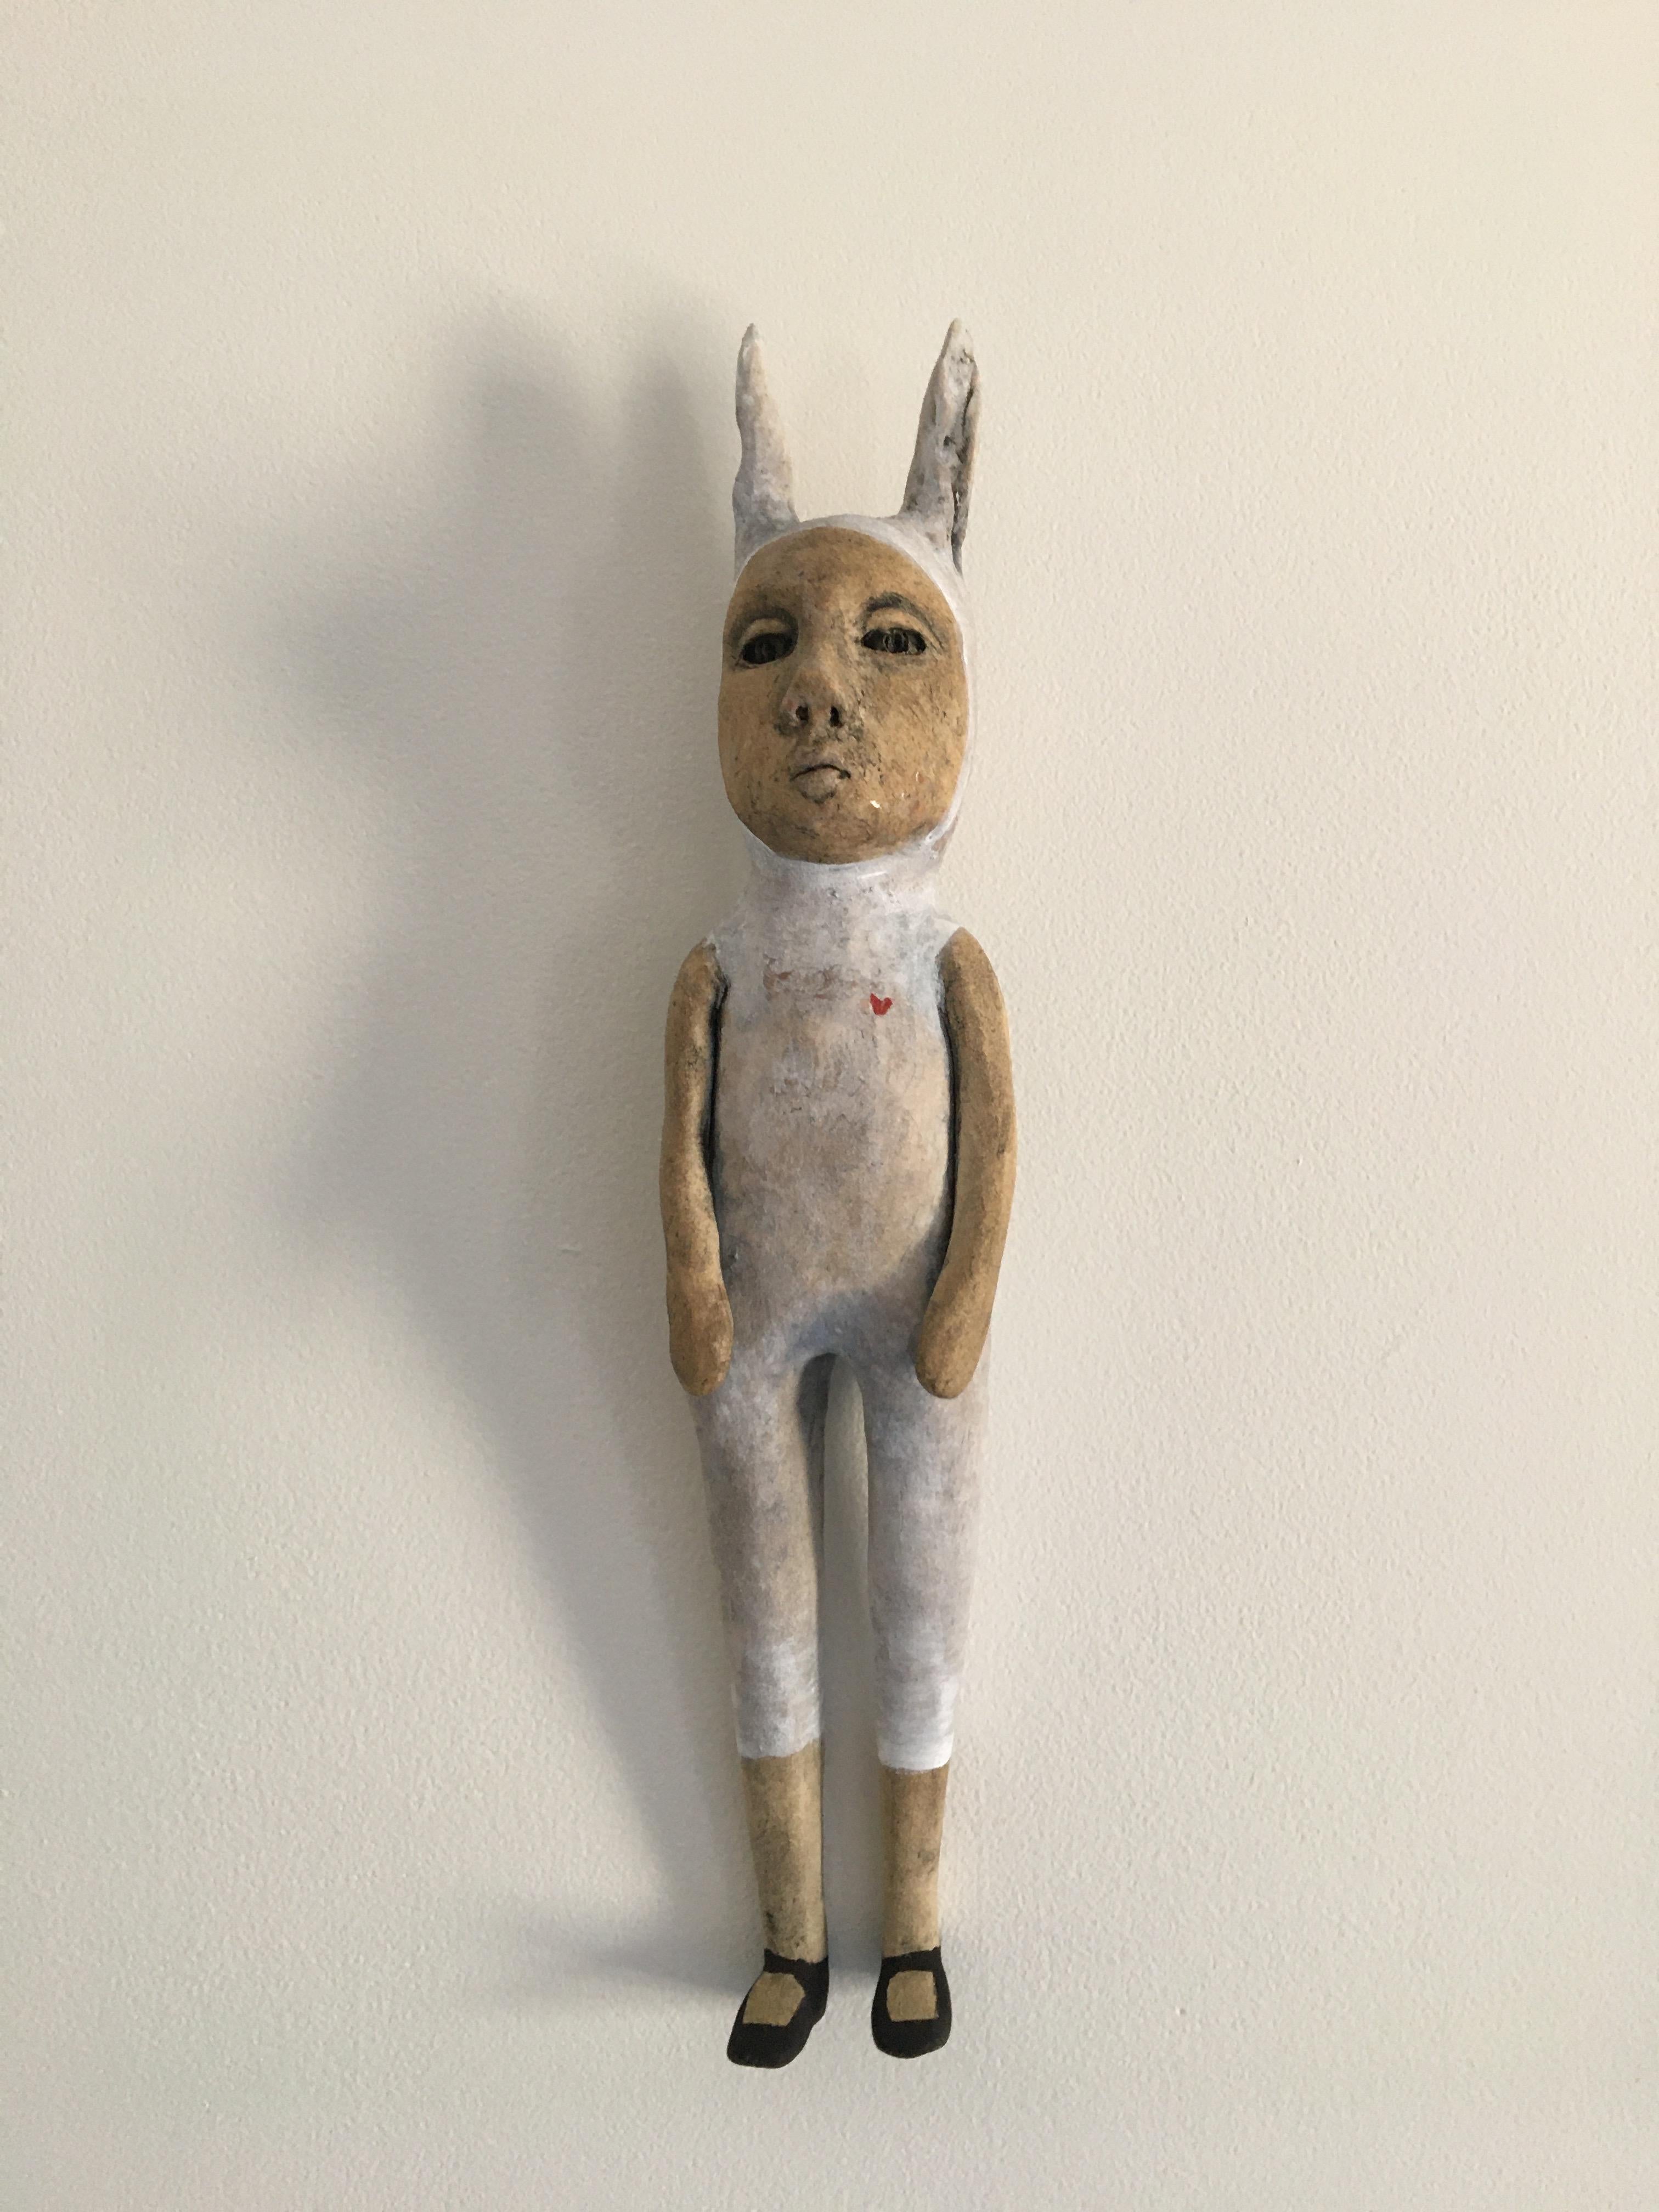 Ashley Benton Figurative Sculpture - Ceramic hanging wall sculpture: 'All we need is love'